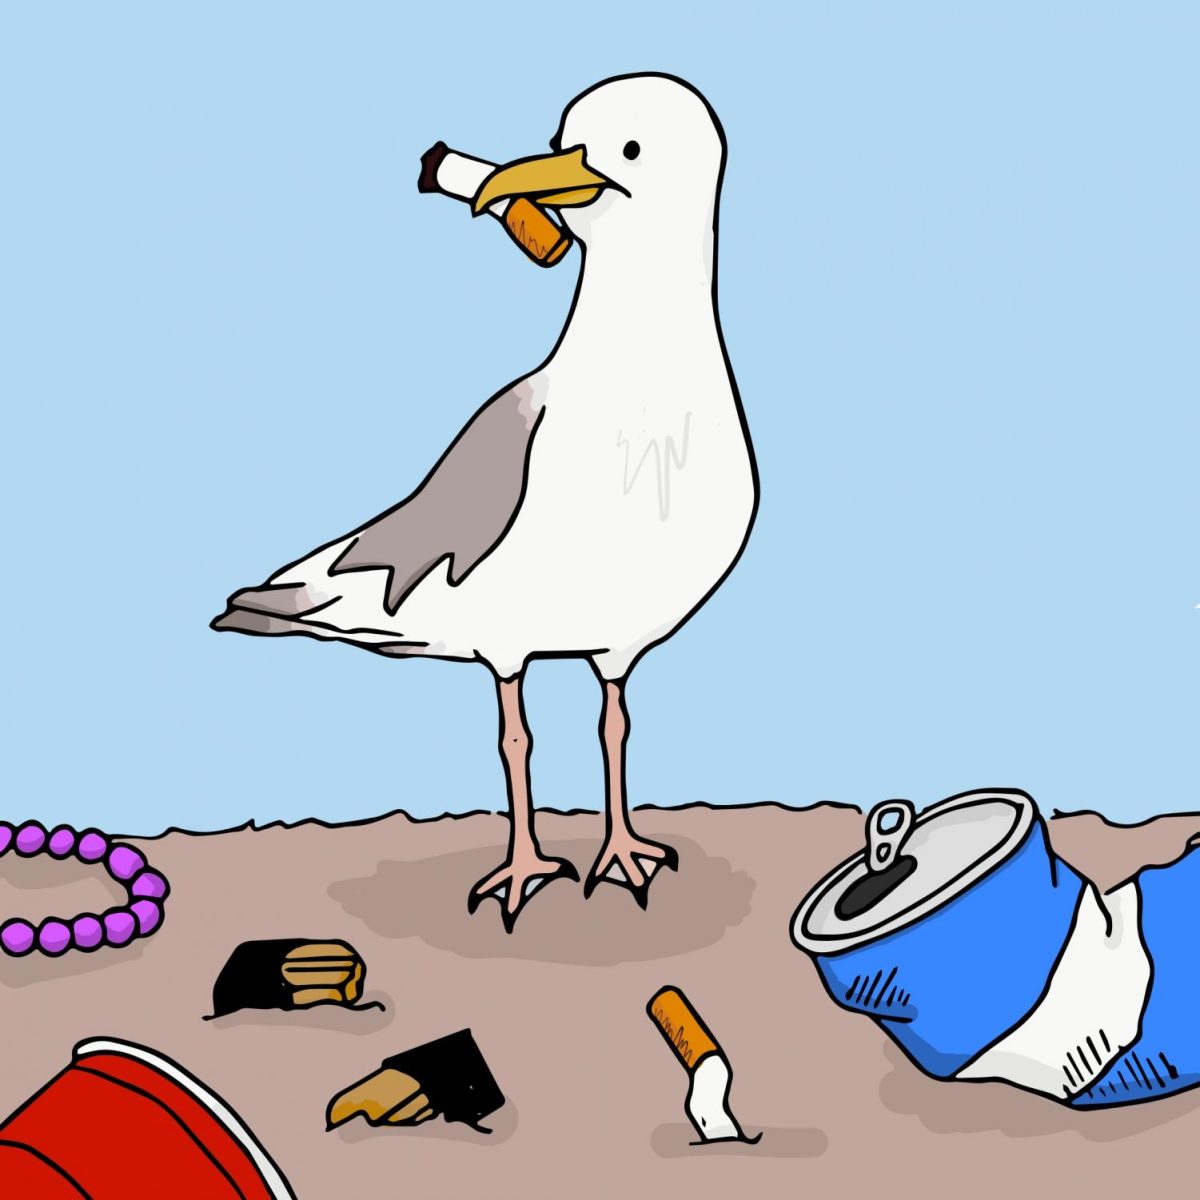 Seagull with a cigarette in mouth surrounded by trash.